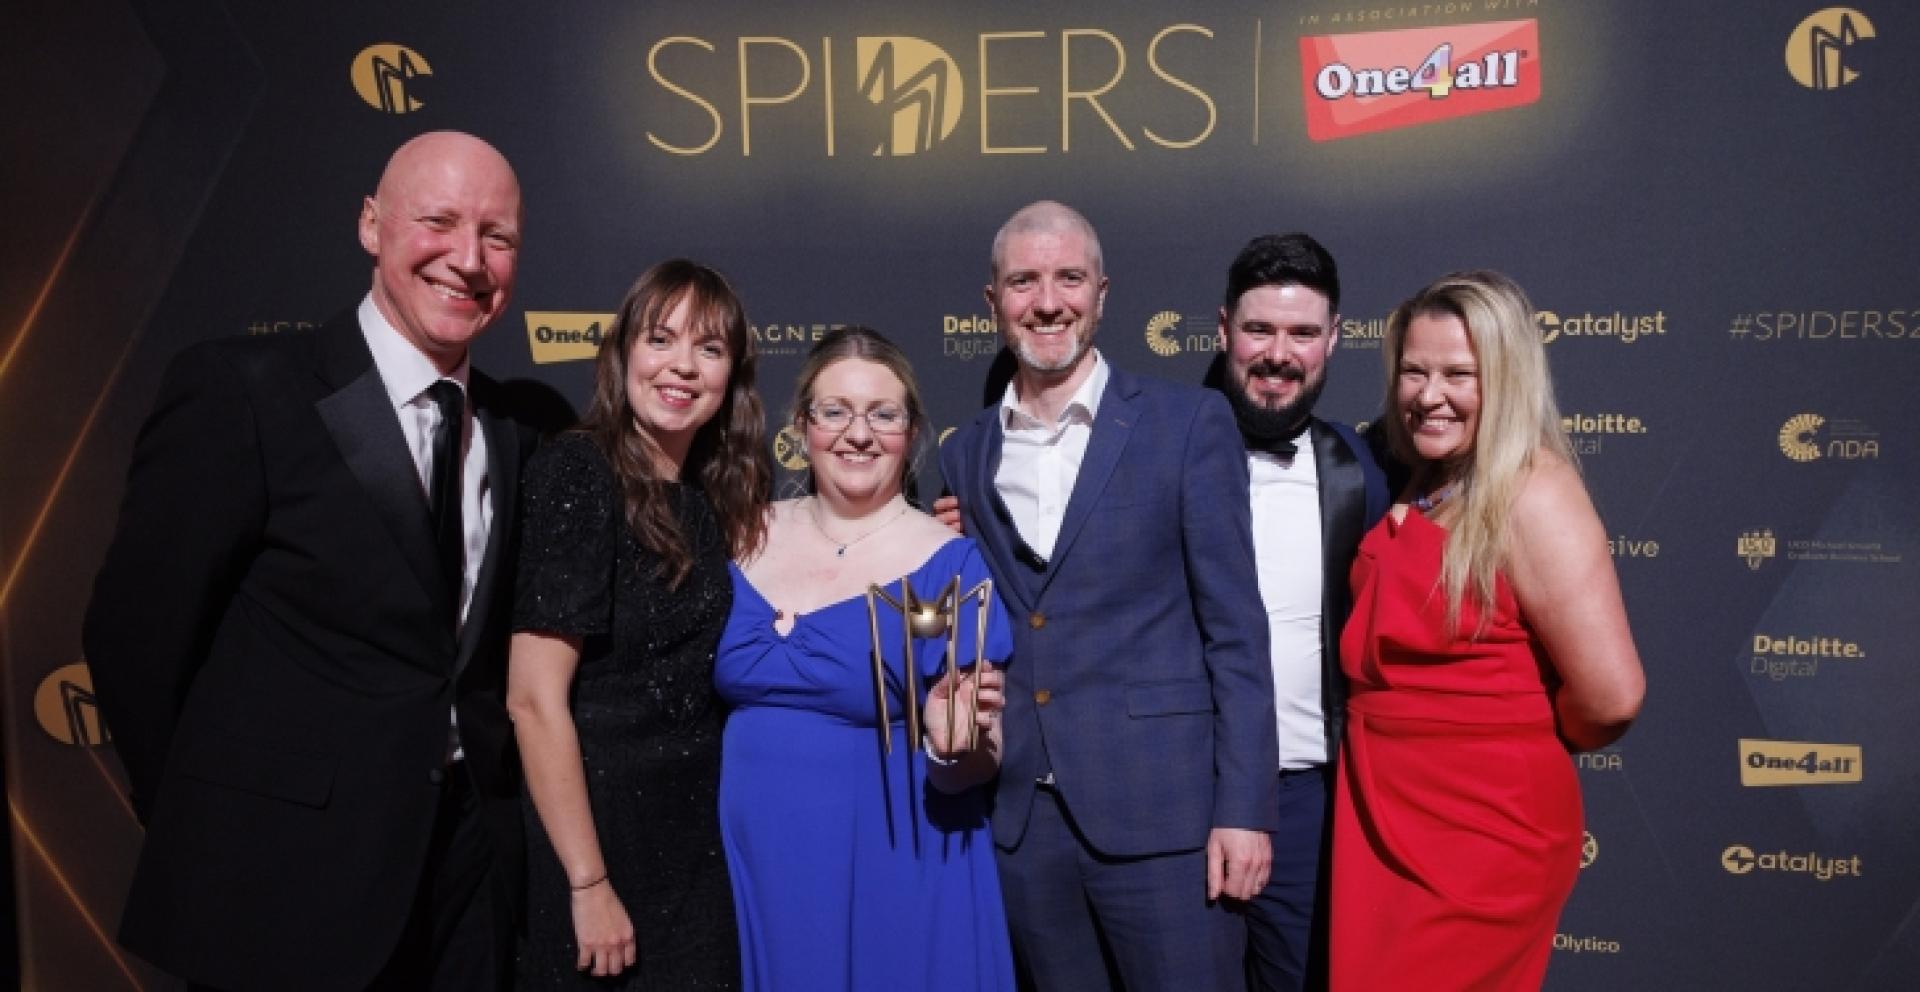 Celebrating winning the Grand Prix award at the 2024 Spider Awards: Ricky Harris from bigO, Emma Conway from the National Library of Ireland, Annertech’s Stella Power, Mark Conroy and Sean O’Connell, and Louise Hickey from headline sponsor One4all.